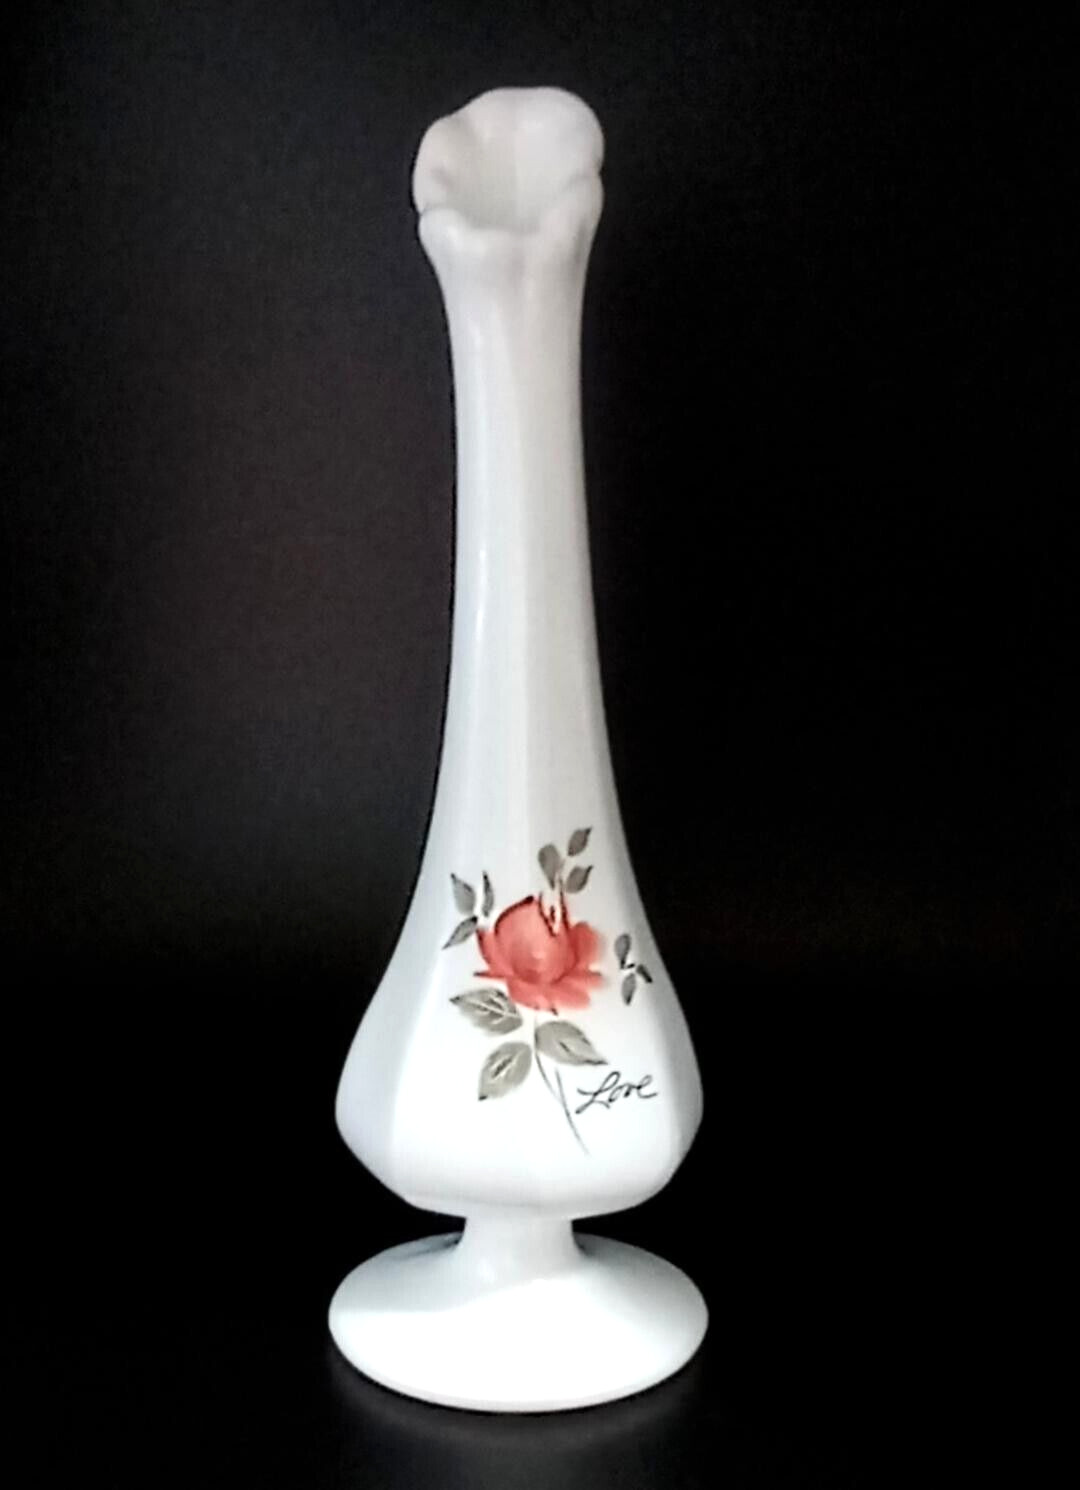 Vintage Floral Fenton Milk Glass Vase ~ Hand Painted & Signed by the Artist